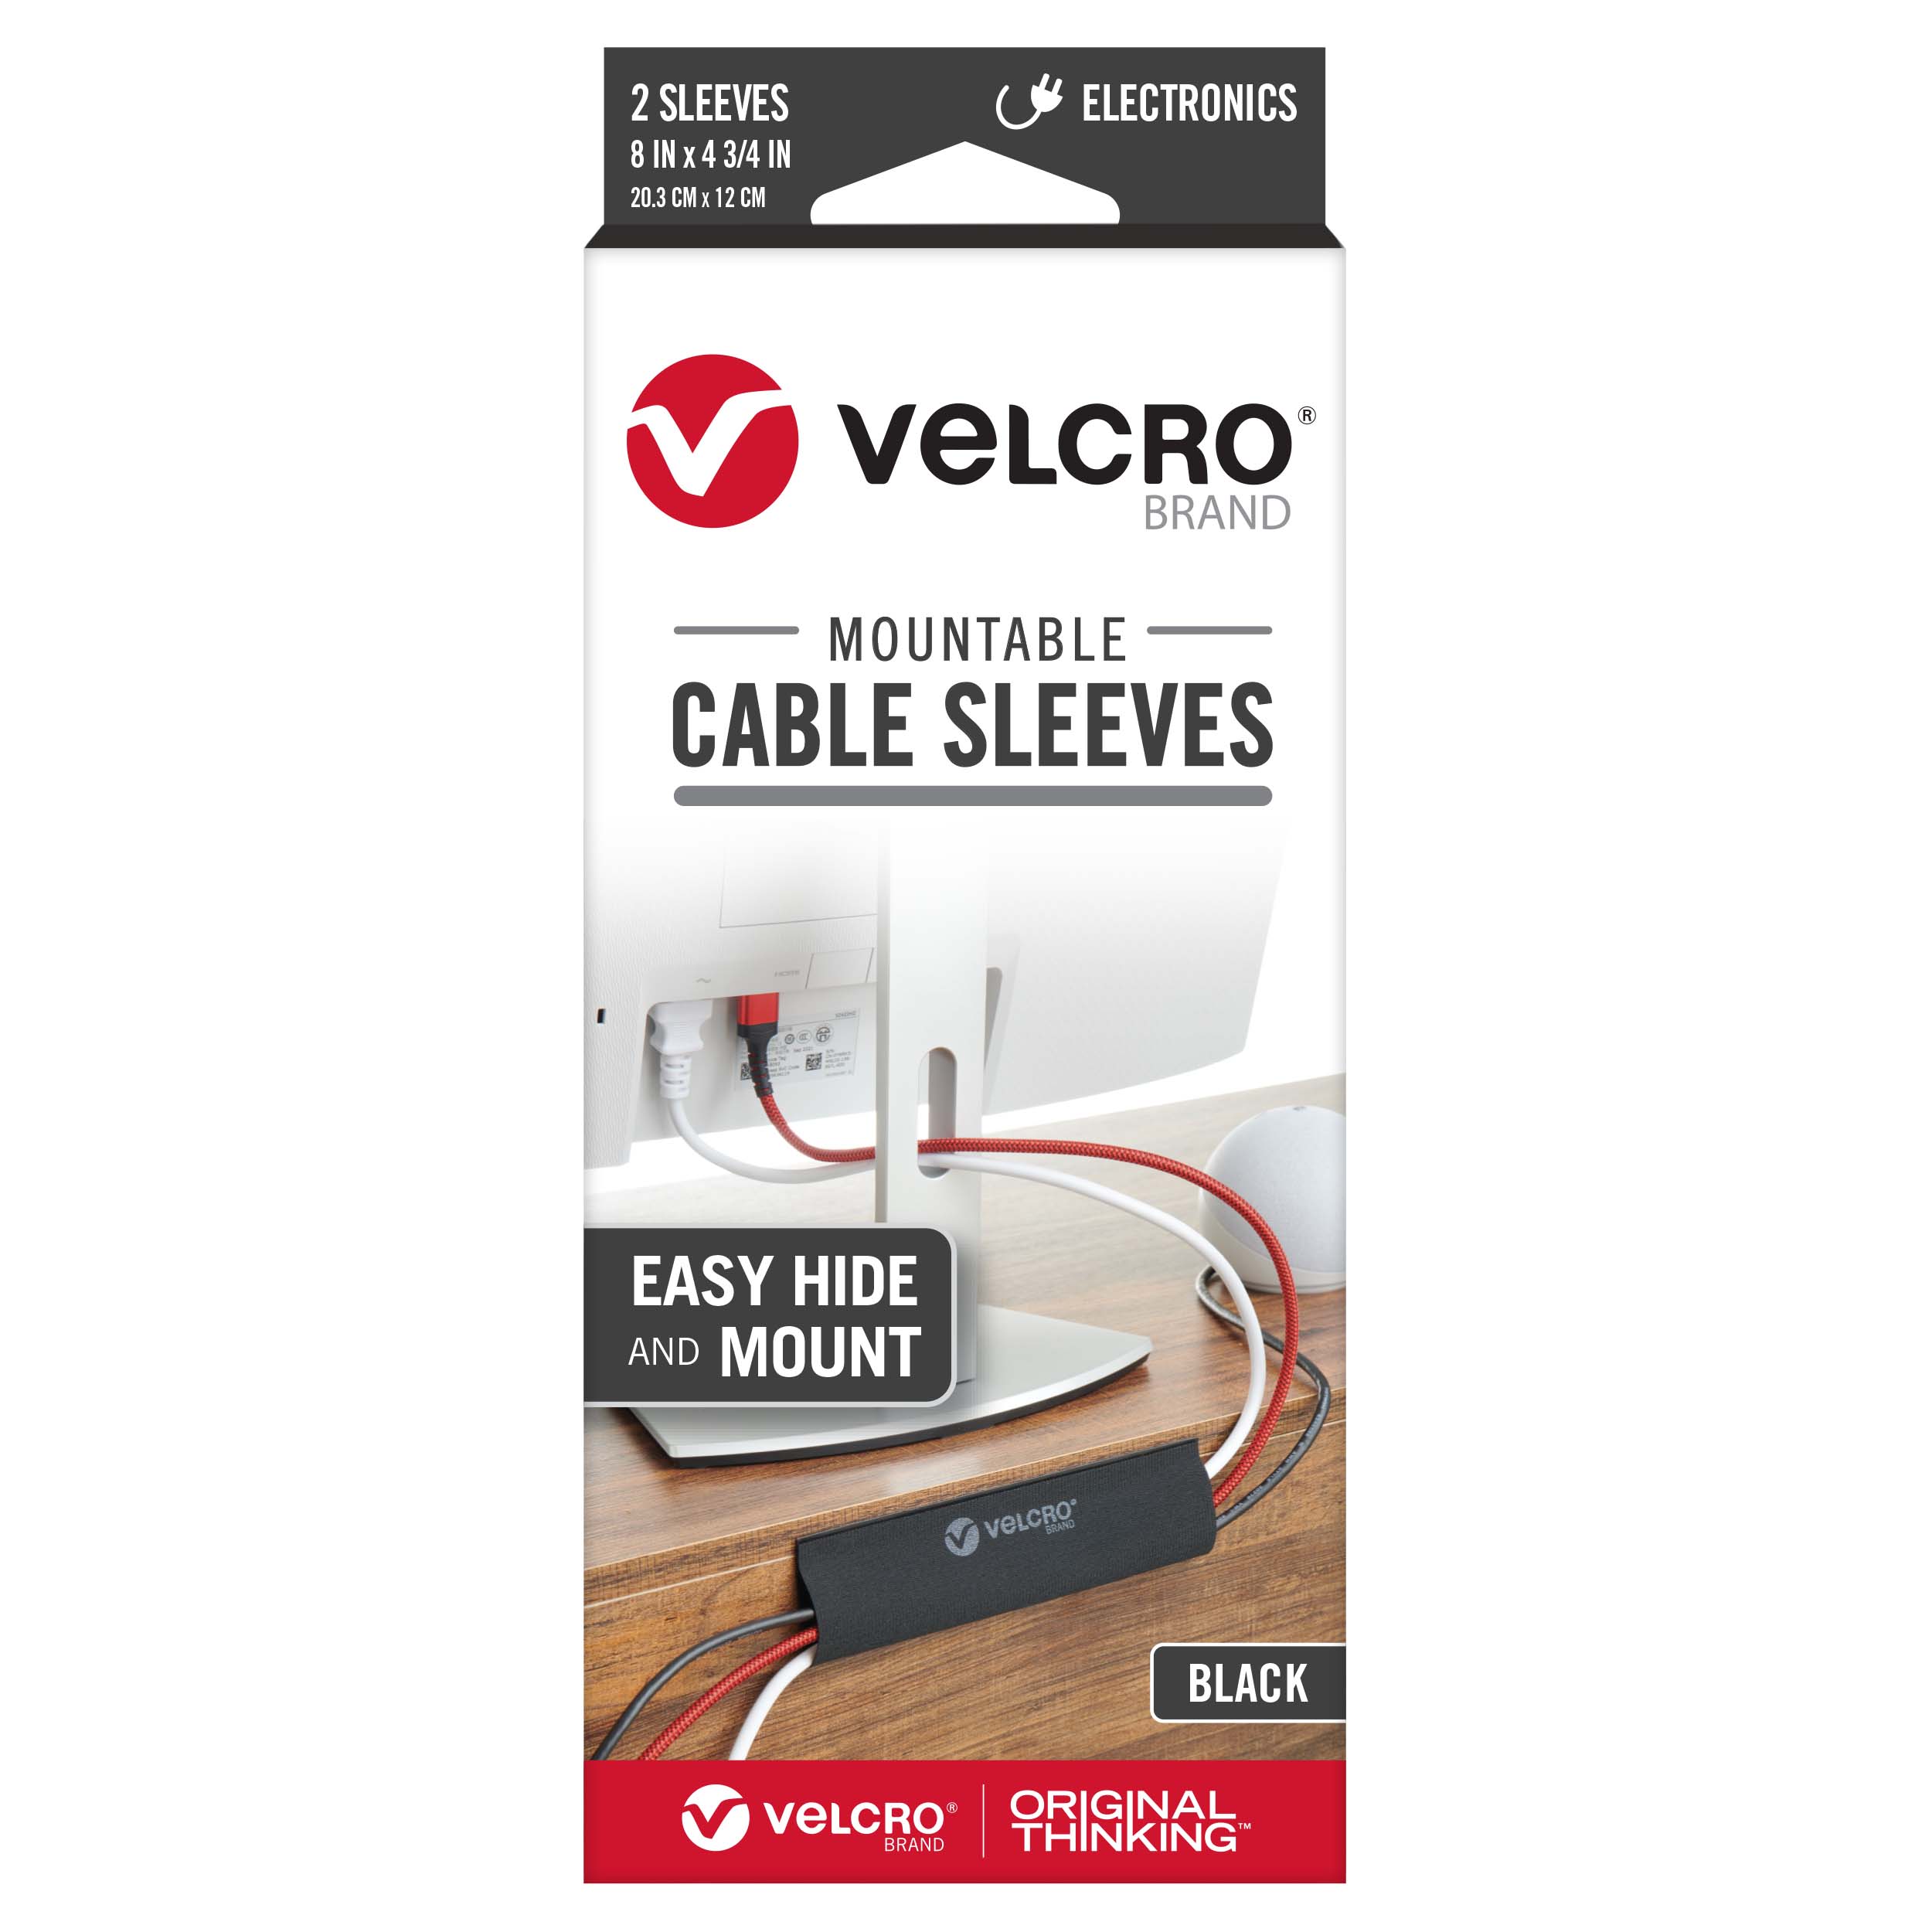 VELCRO Brand One-wrap Thin Ties 8in X 1/2in Gray and Black 50 Ct in the  Specialty Fasteners & Fastener Kits department at